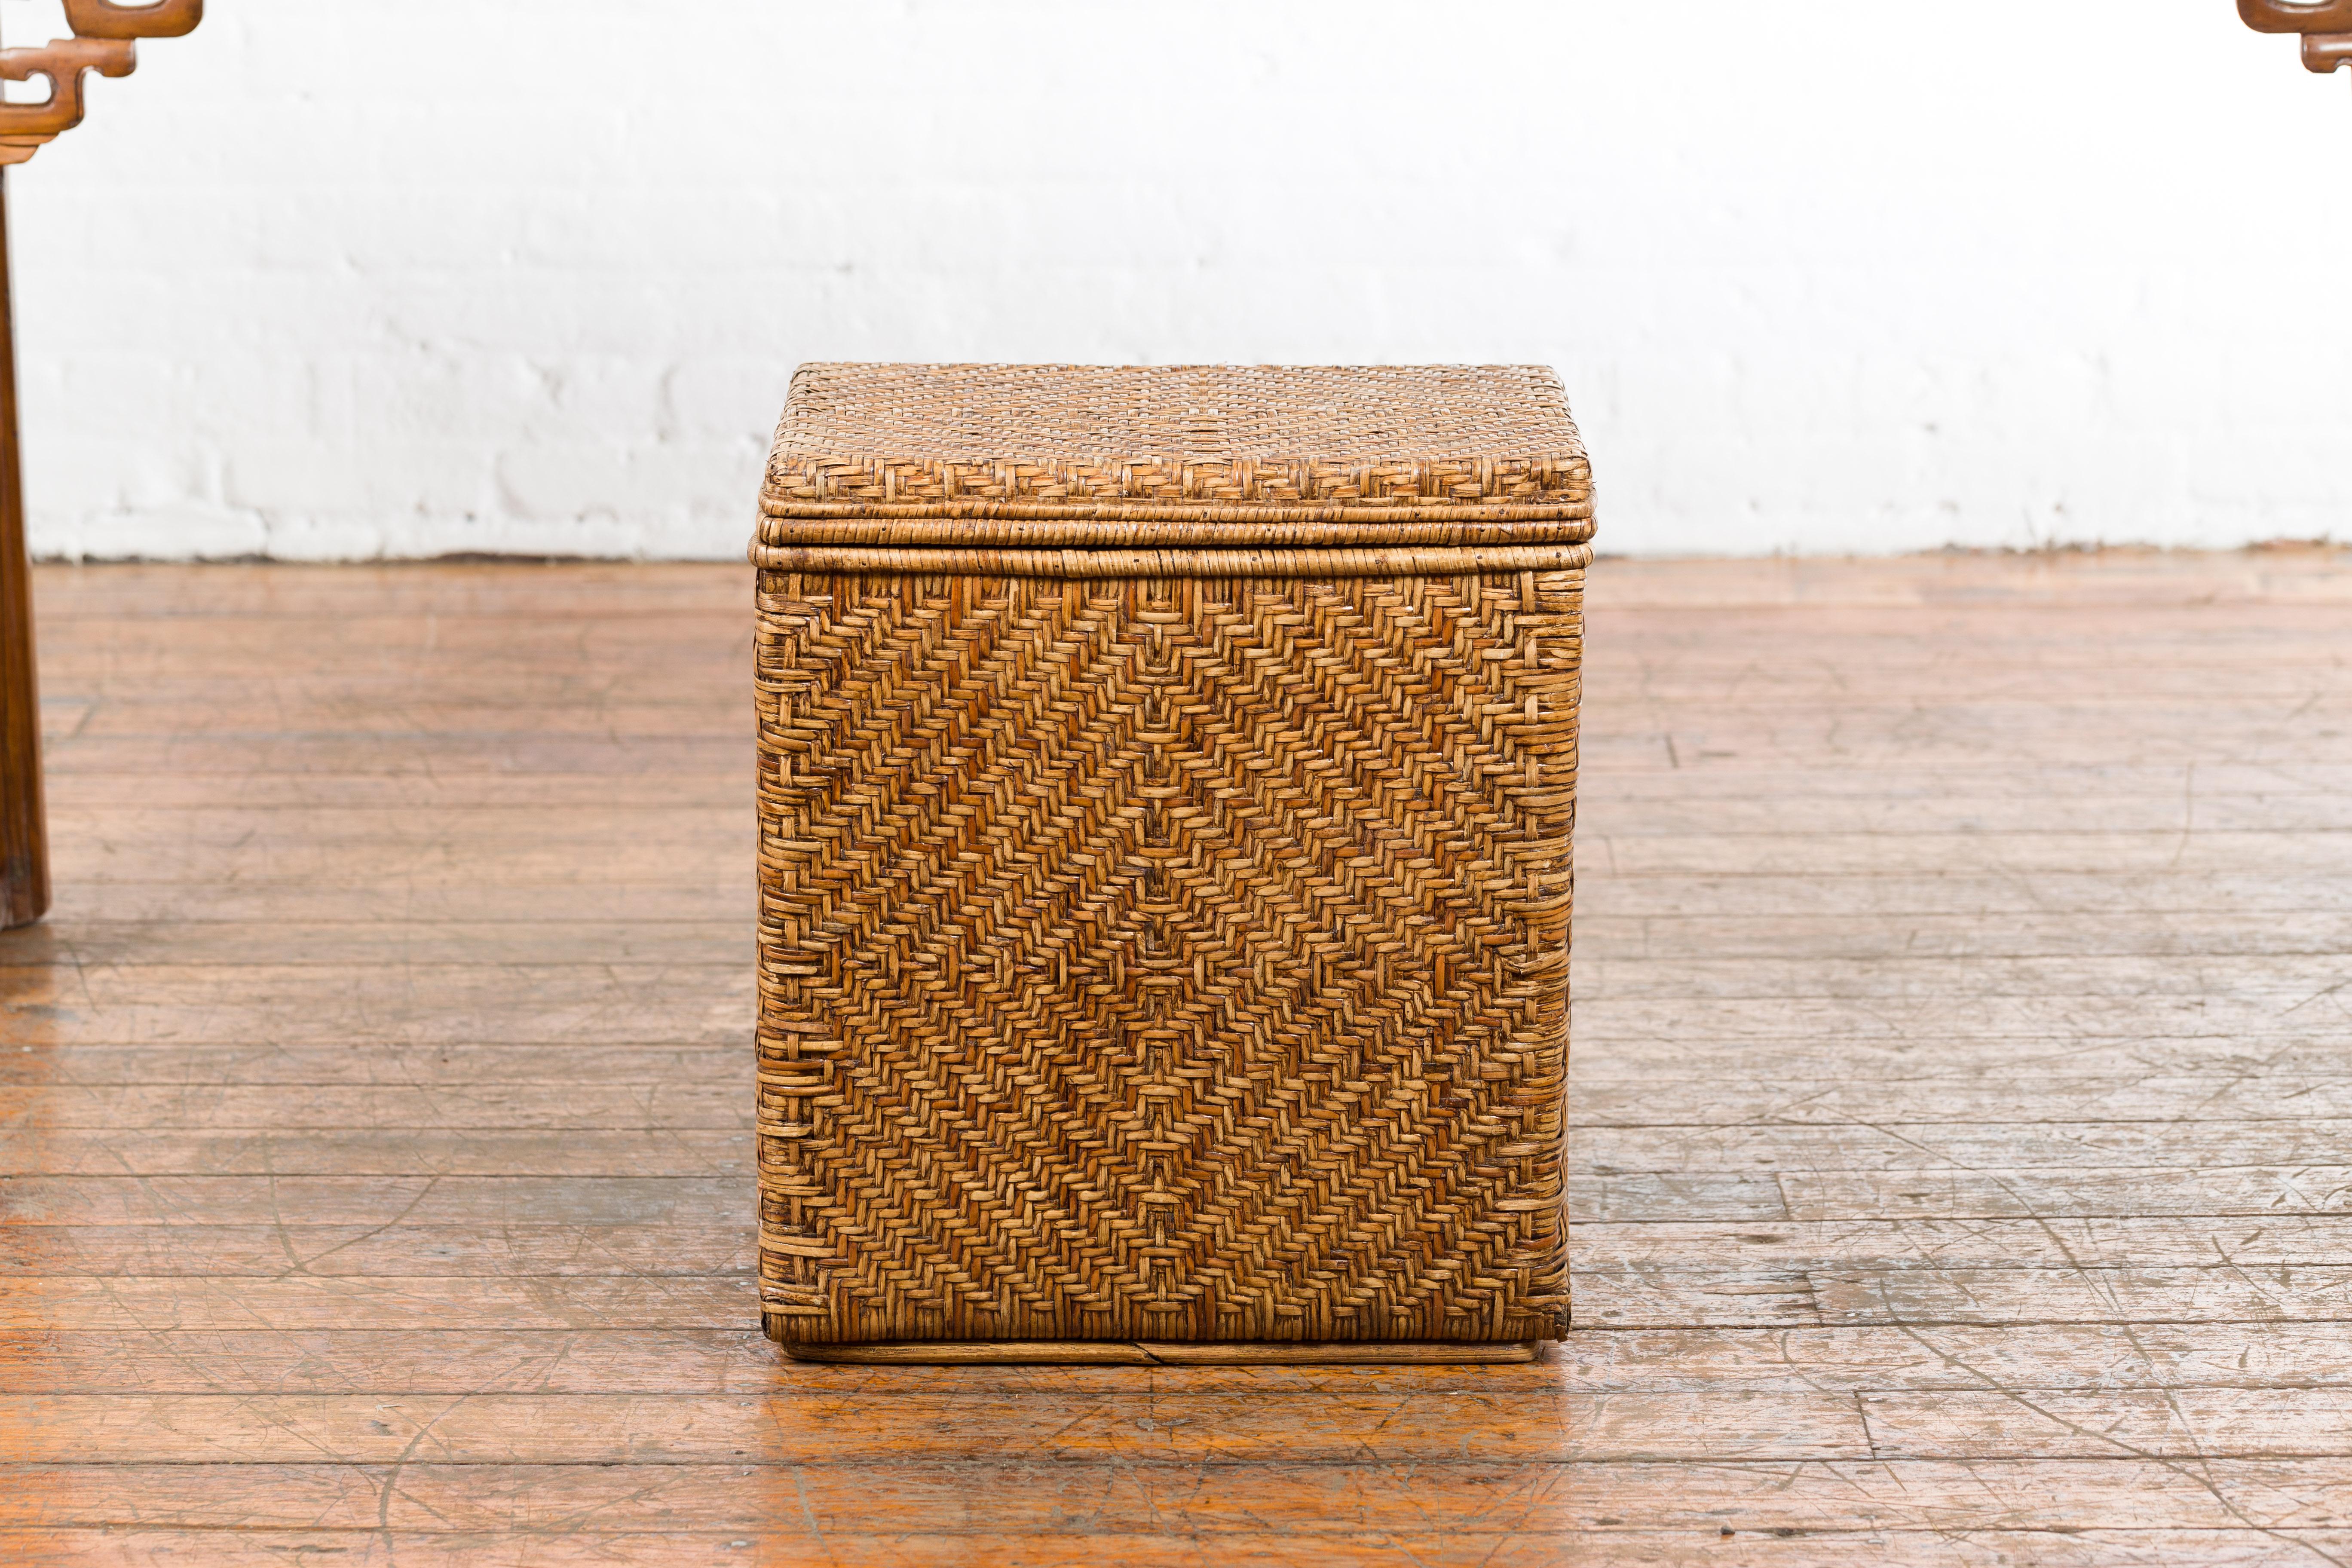 Vintage Burmese Hand-Woven Rattan over Wood Basket Hamper with Pierced Handles In Good Condition For Sale In Yonkers, NY